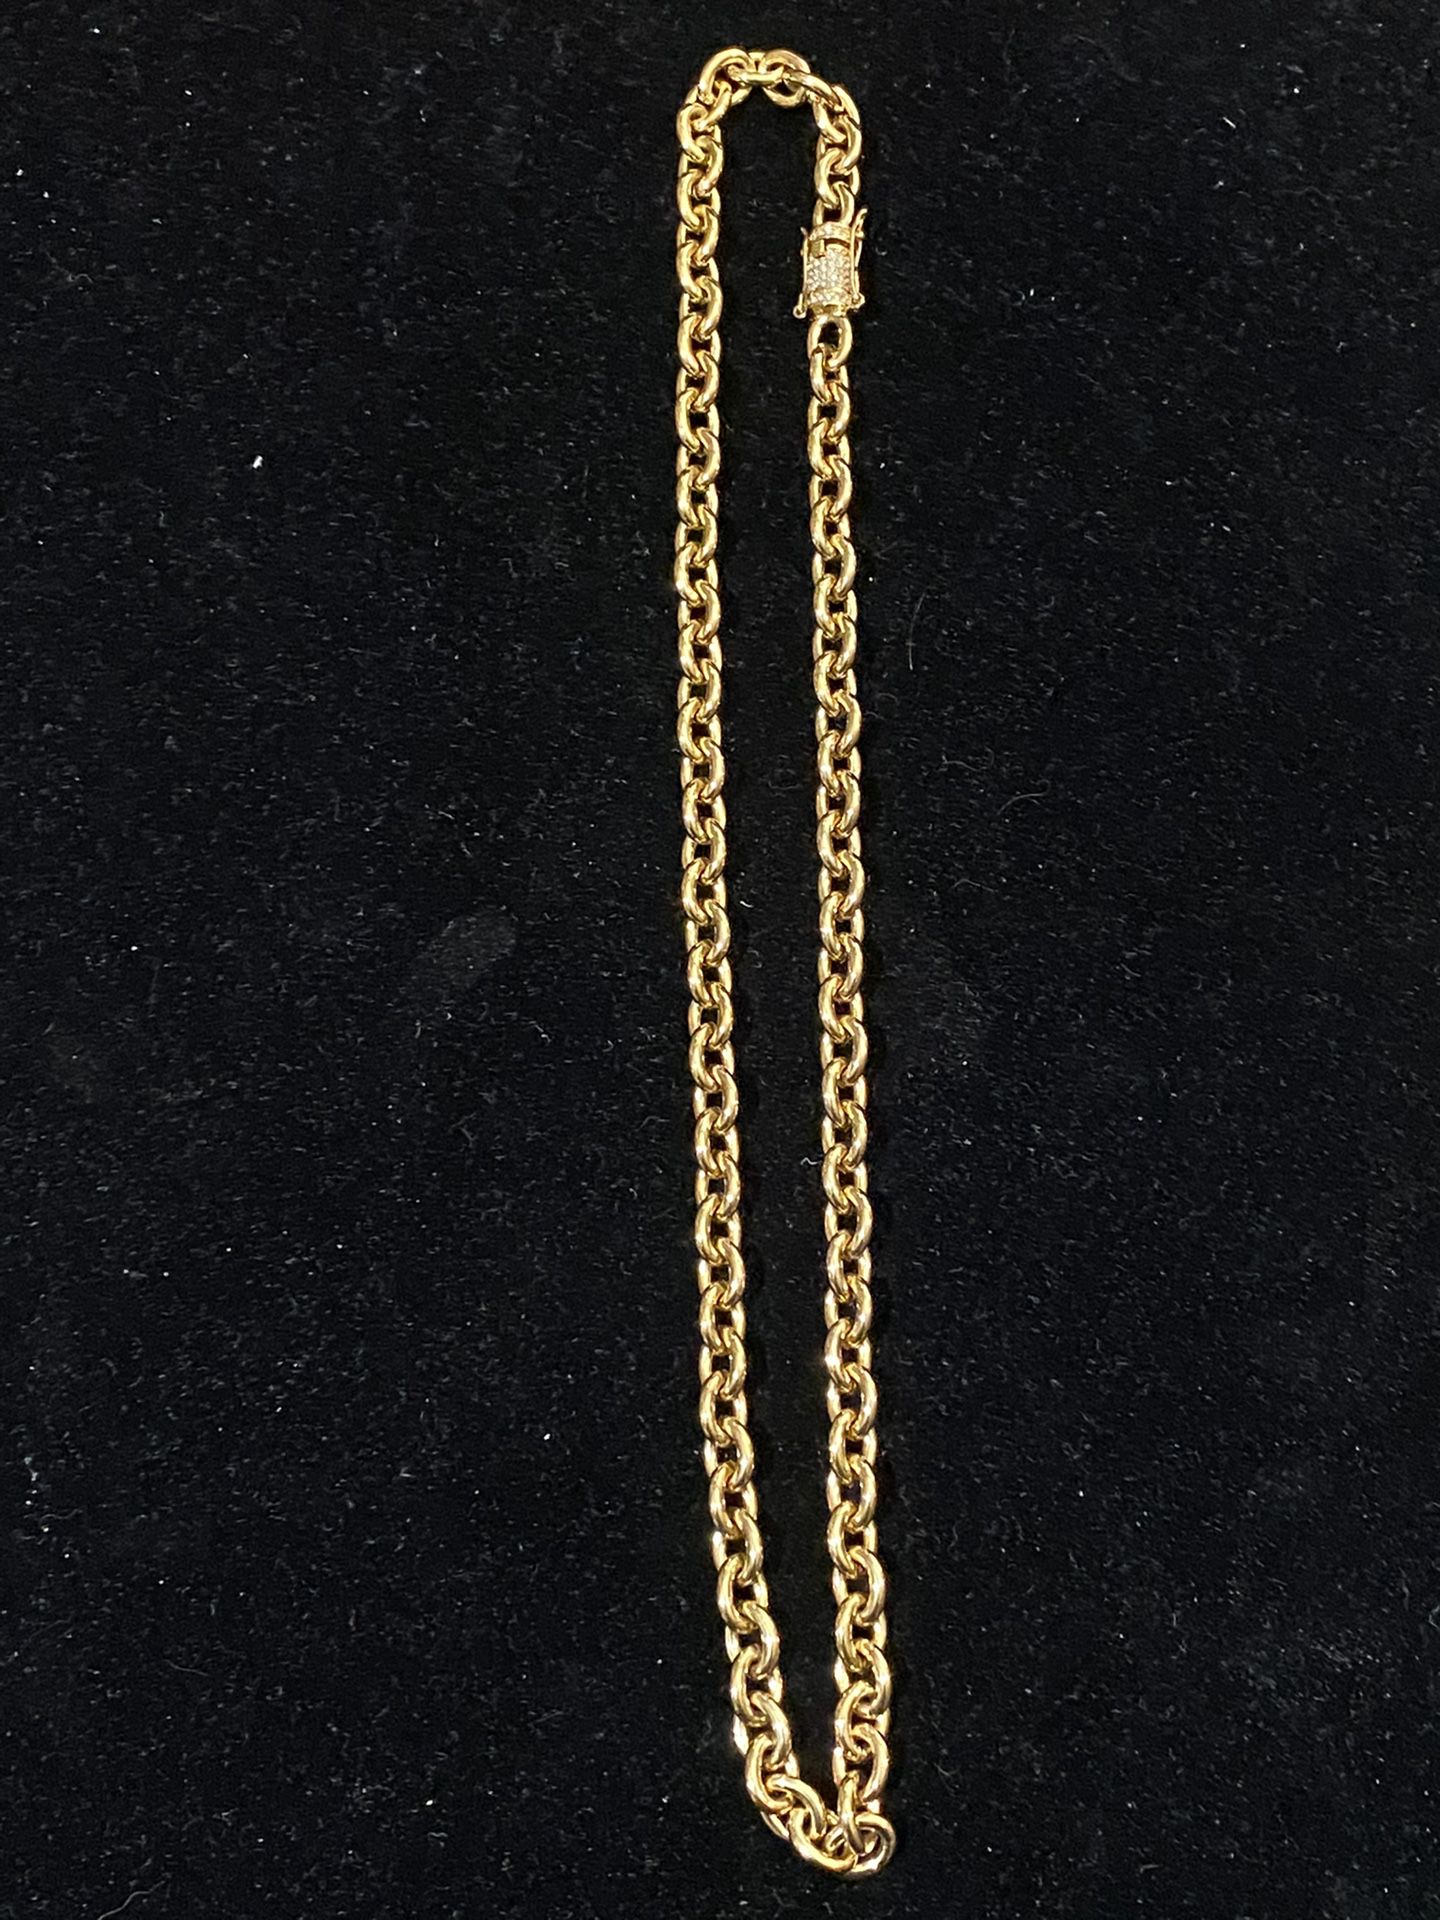 Brand new 3.16 stainless steel 14k gold plated chain 24” length by 8mm wide